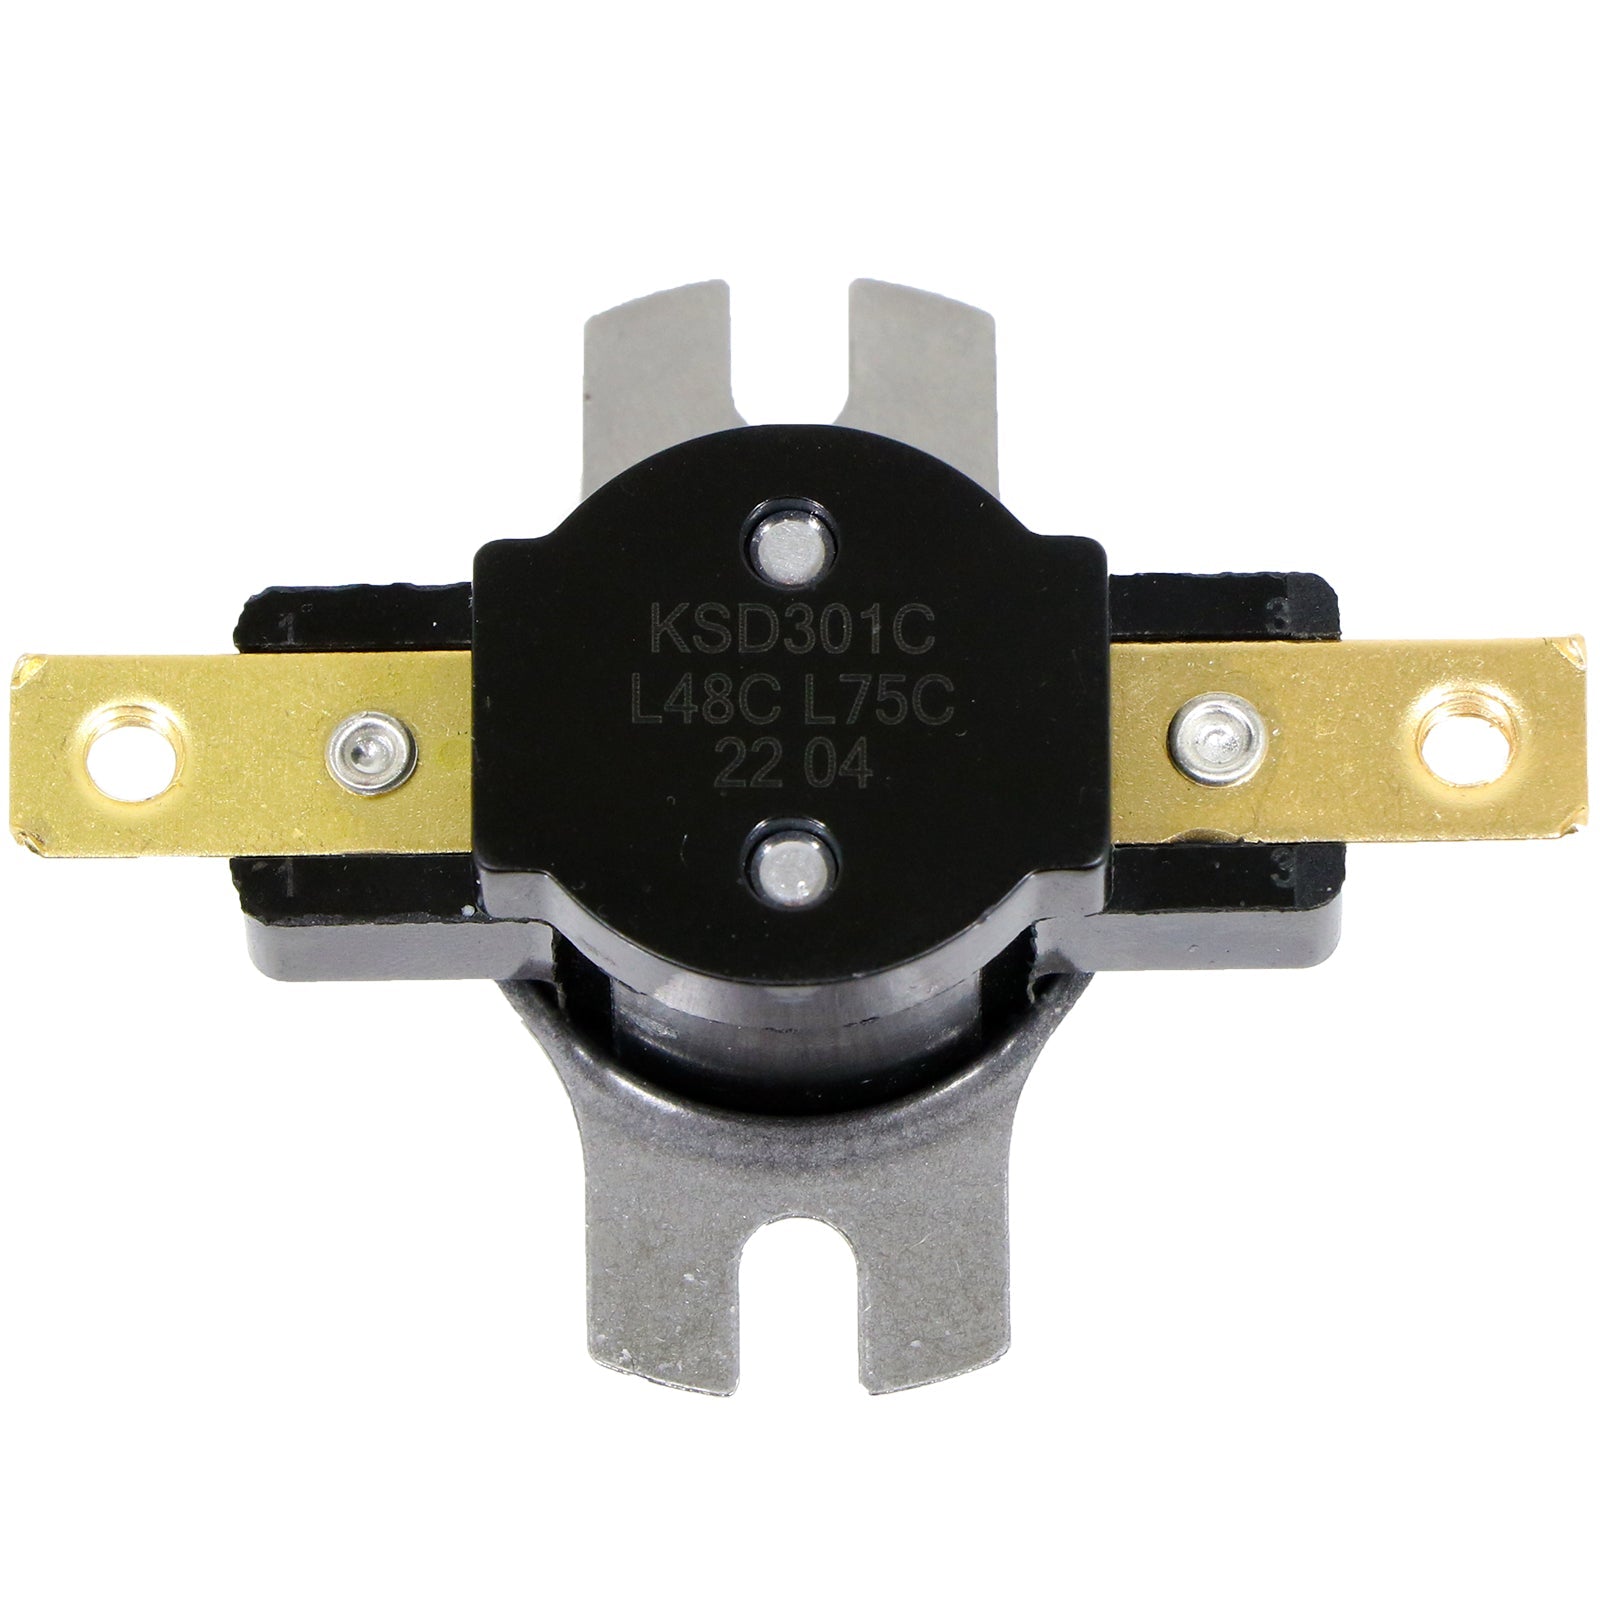 Top view of Shower Switch for MIRA Elite Sport Go Jump Vie Thermal Cut Out Fuse TOC 1736.436